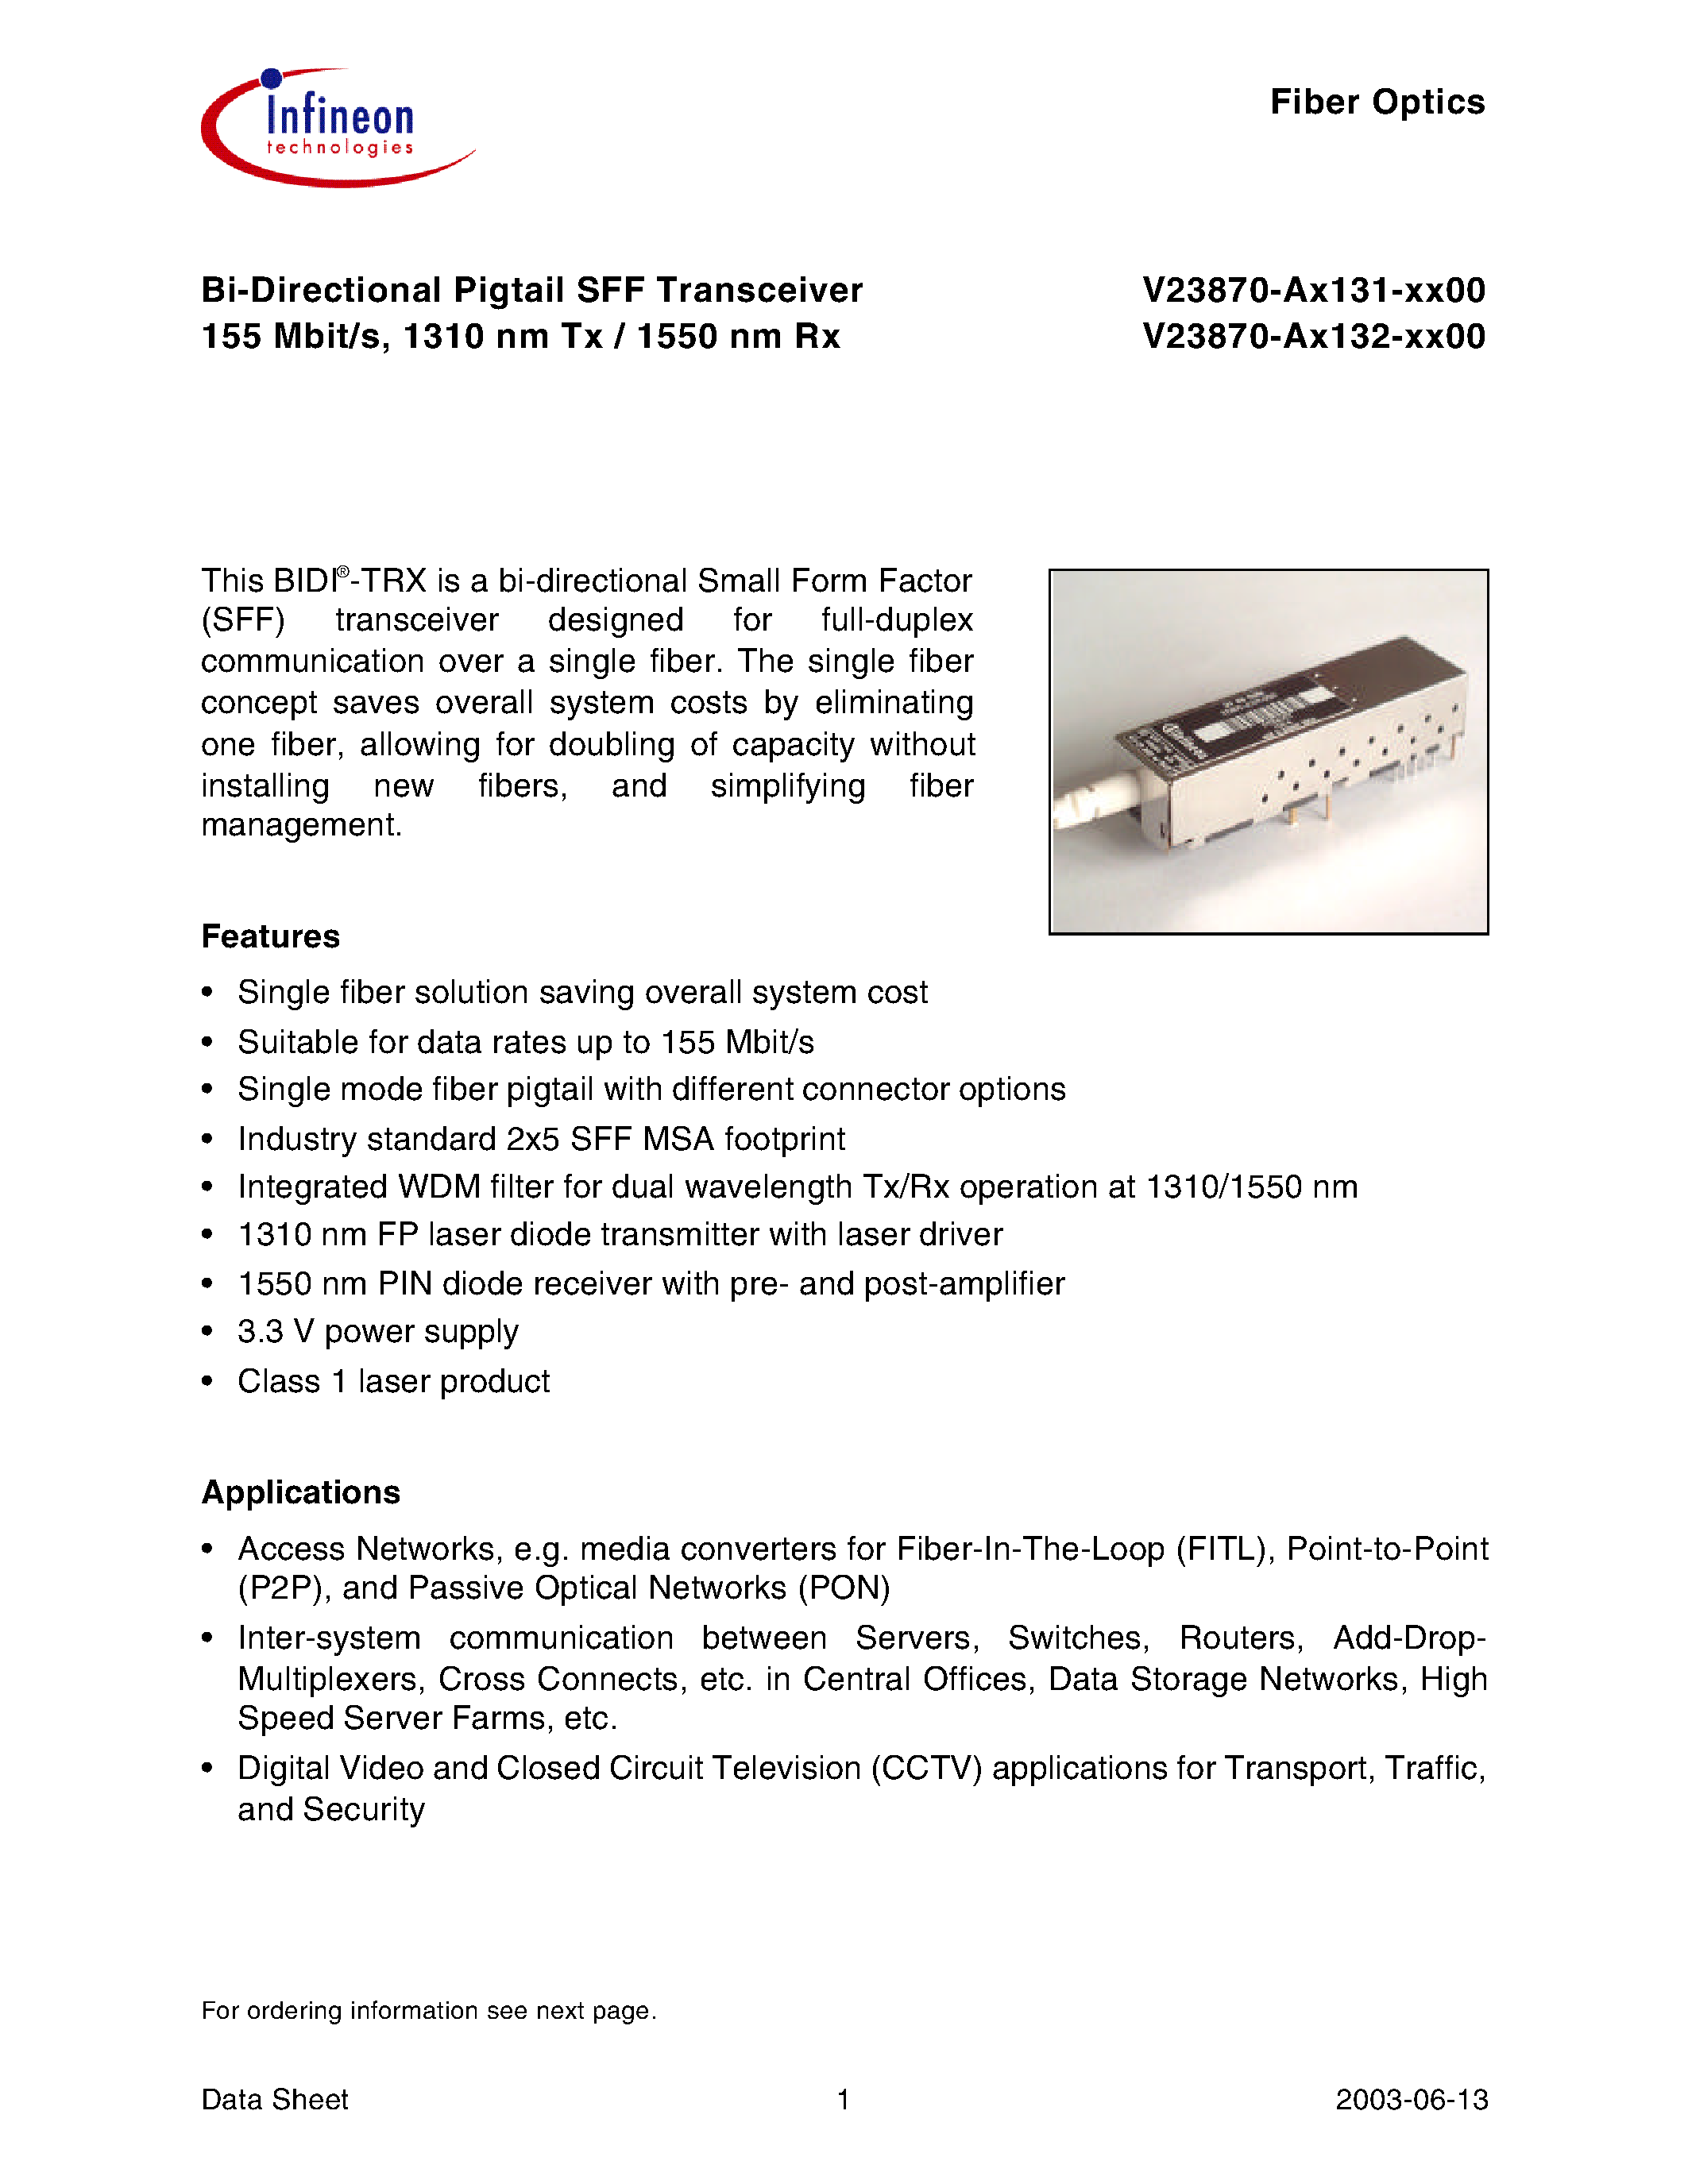 Datasheet V23870-A1131-F600 - Bi-Directional Pigtail SFF Transceiver 155 Mbit/s/ 1310 nm Tx / 1550 nm Rx page 1